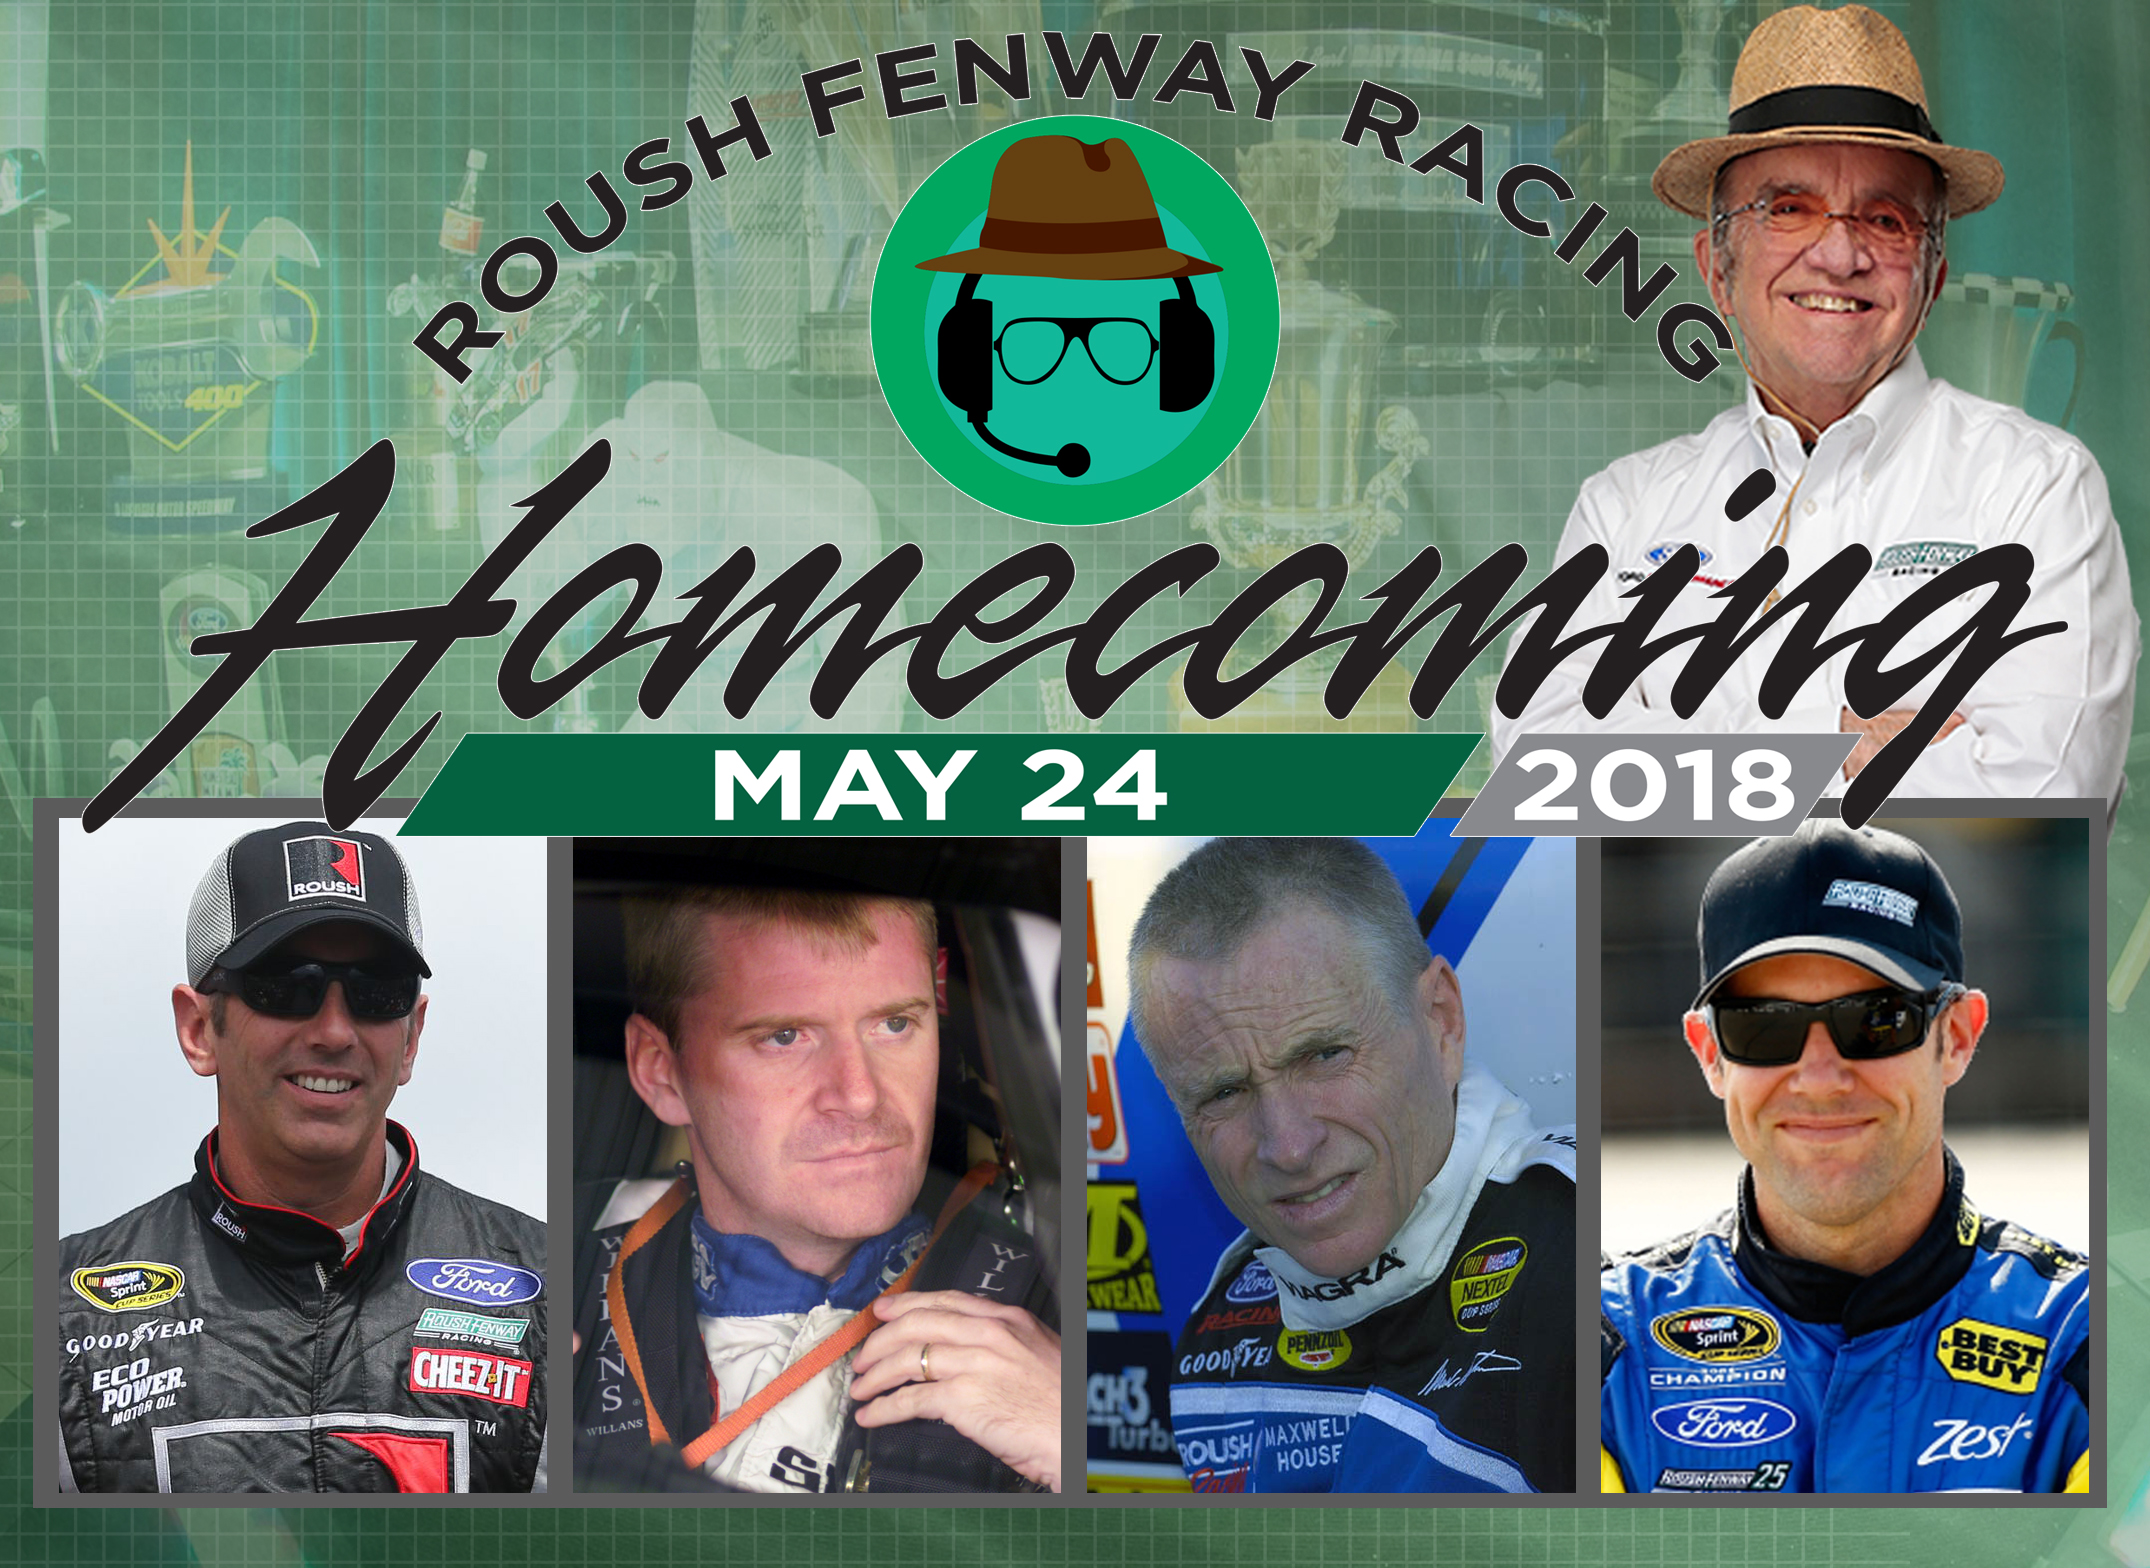 Roush Fenway to Host Special ‘Homecoming’ Fan Day on May 24